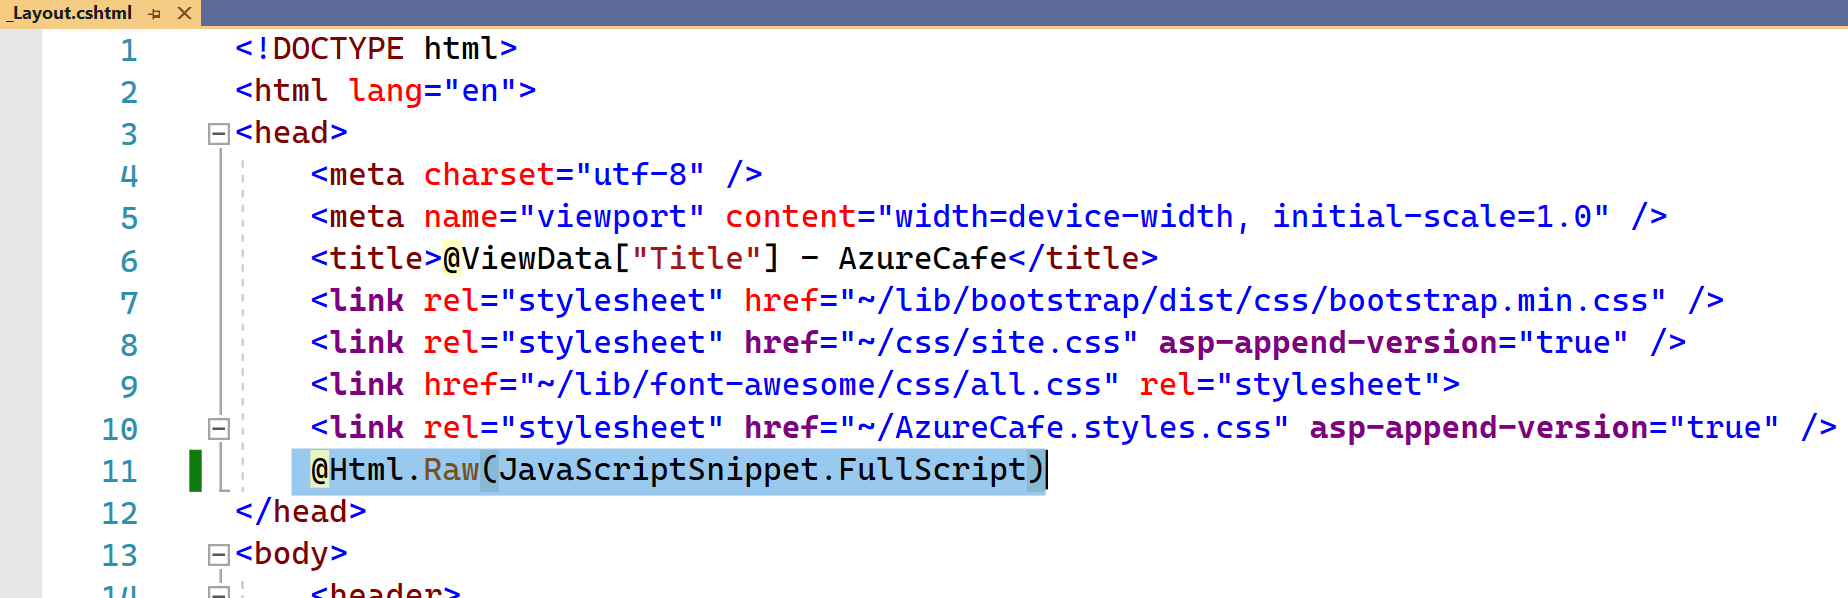 Screenshot of the _Layout.cshtml file in Visual Studio with the preceding line of code highlighted within the head section of the file.